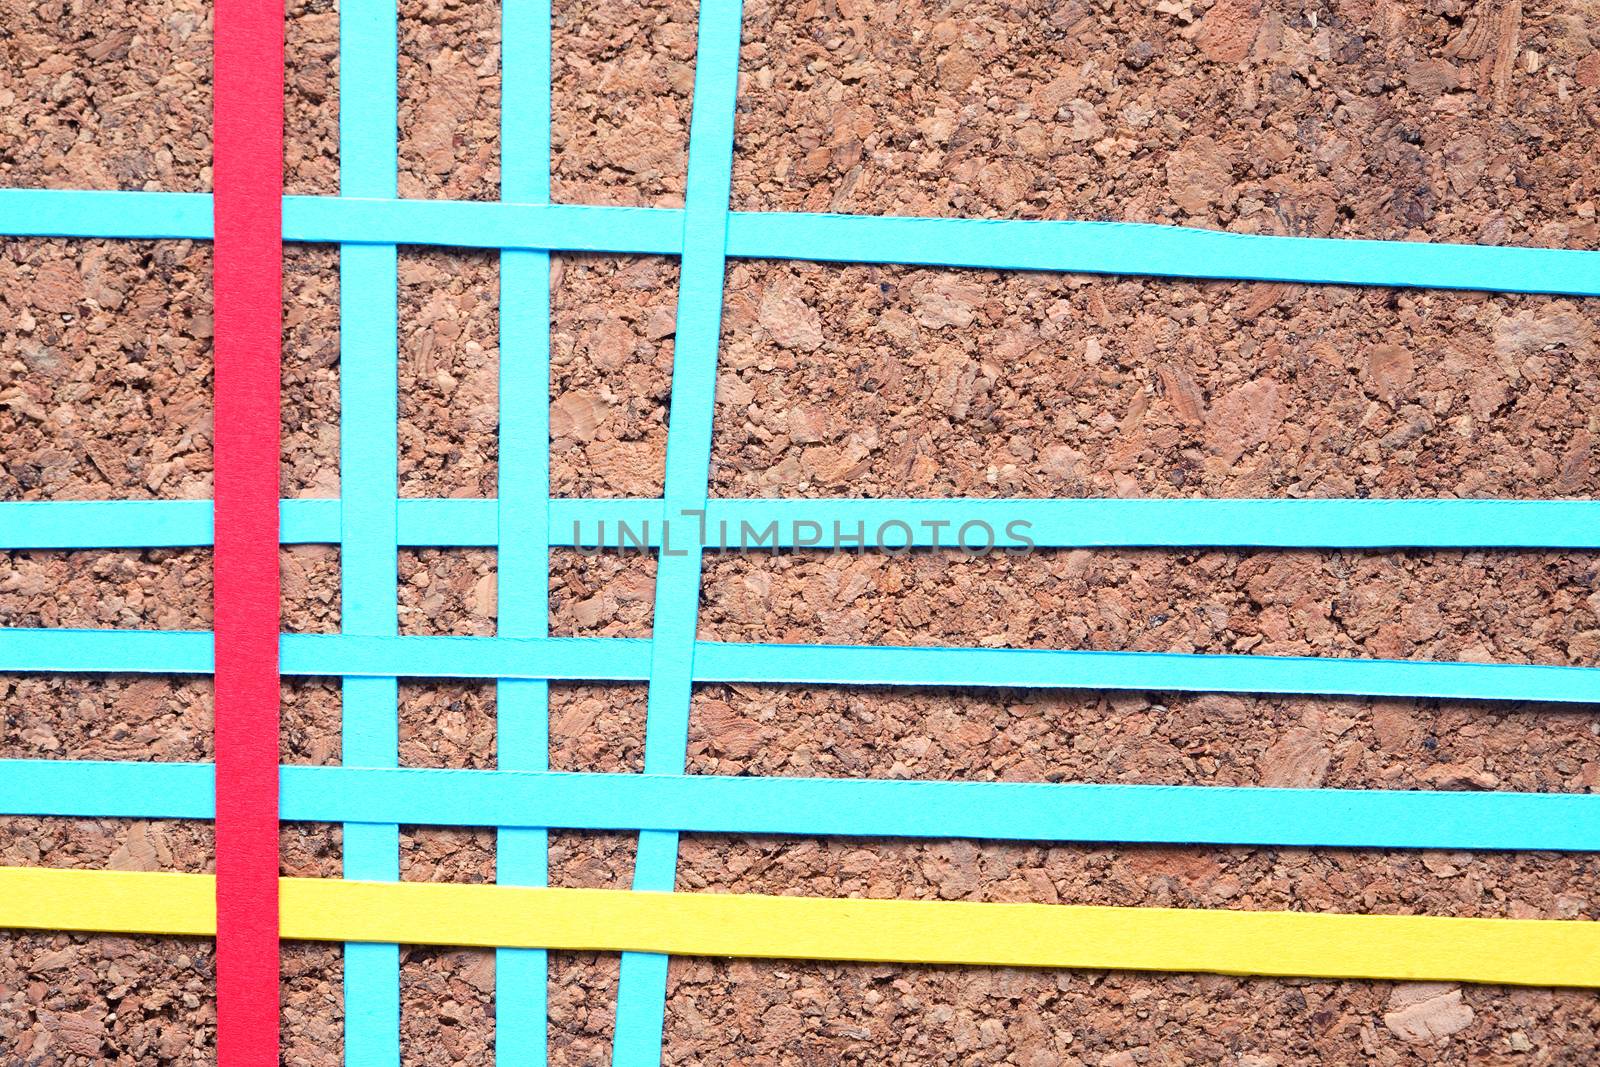 Lot of color paper lines in a row on wooden background